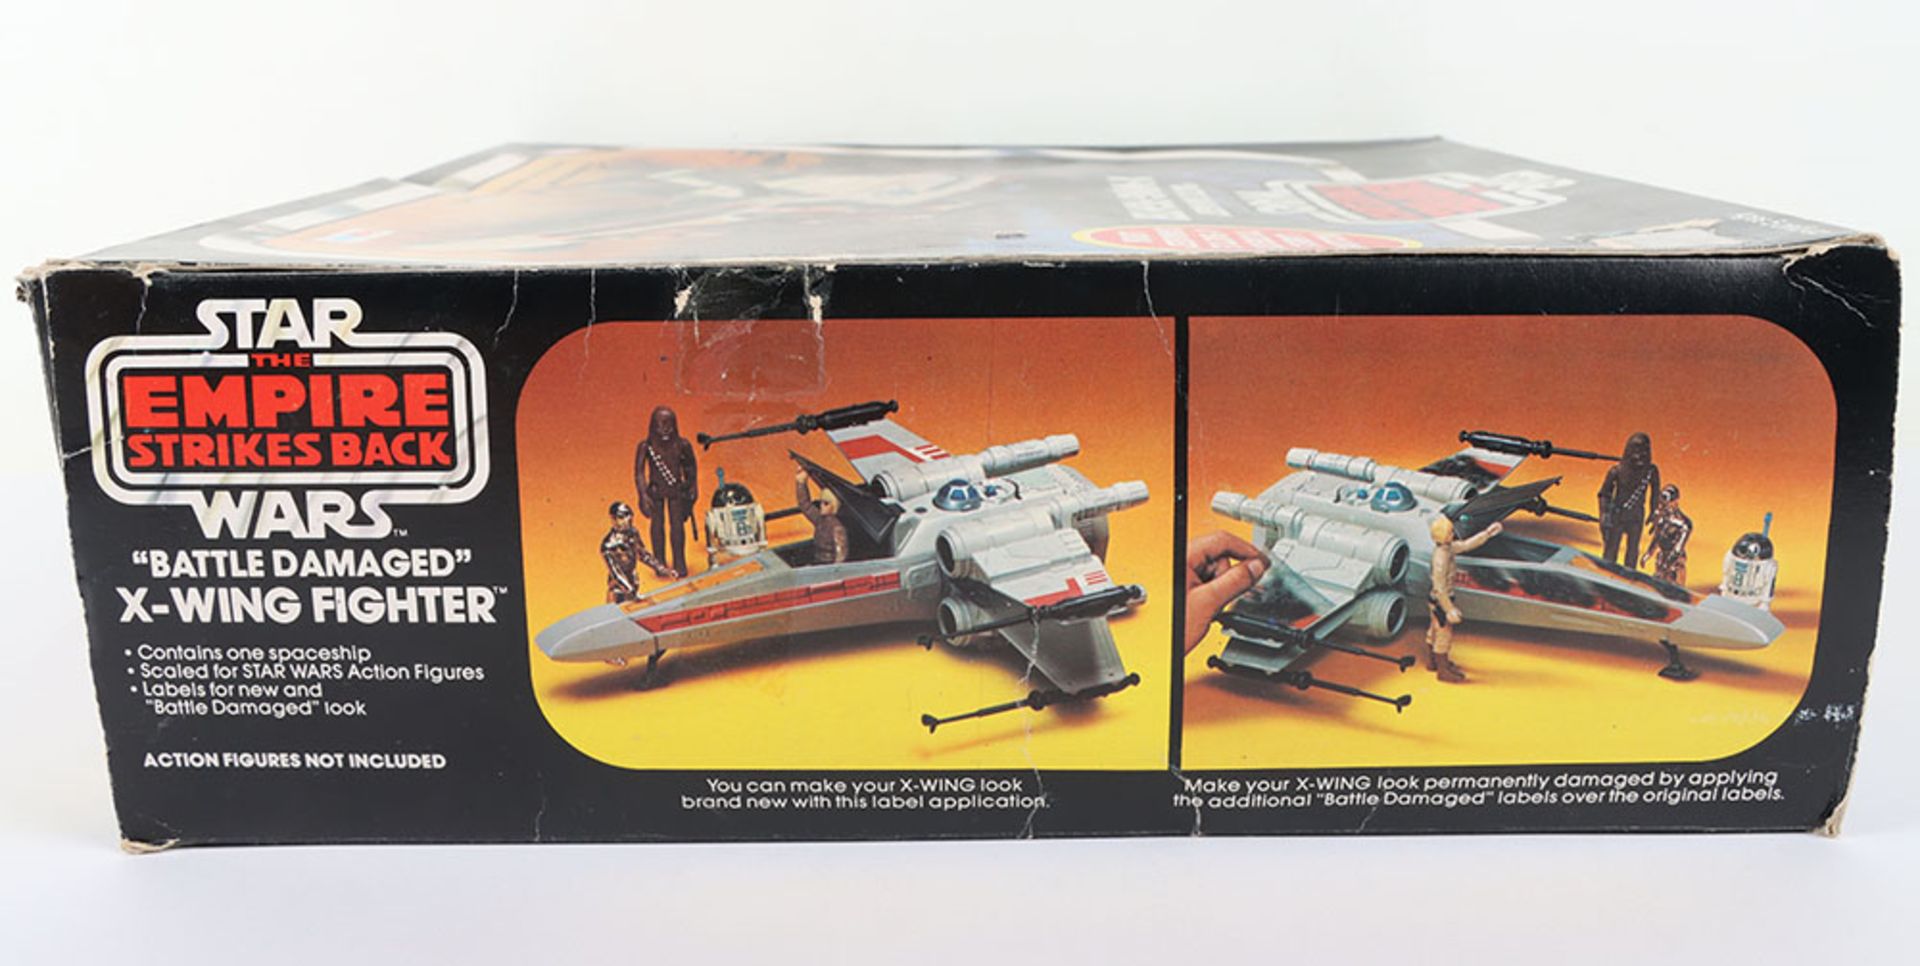 Boxed Vintage Palitoy Star Wars The Empire Strikes Back Battle Damaged X-Wing Fighter - Image 8 of 8